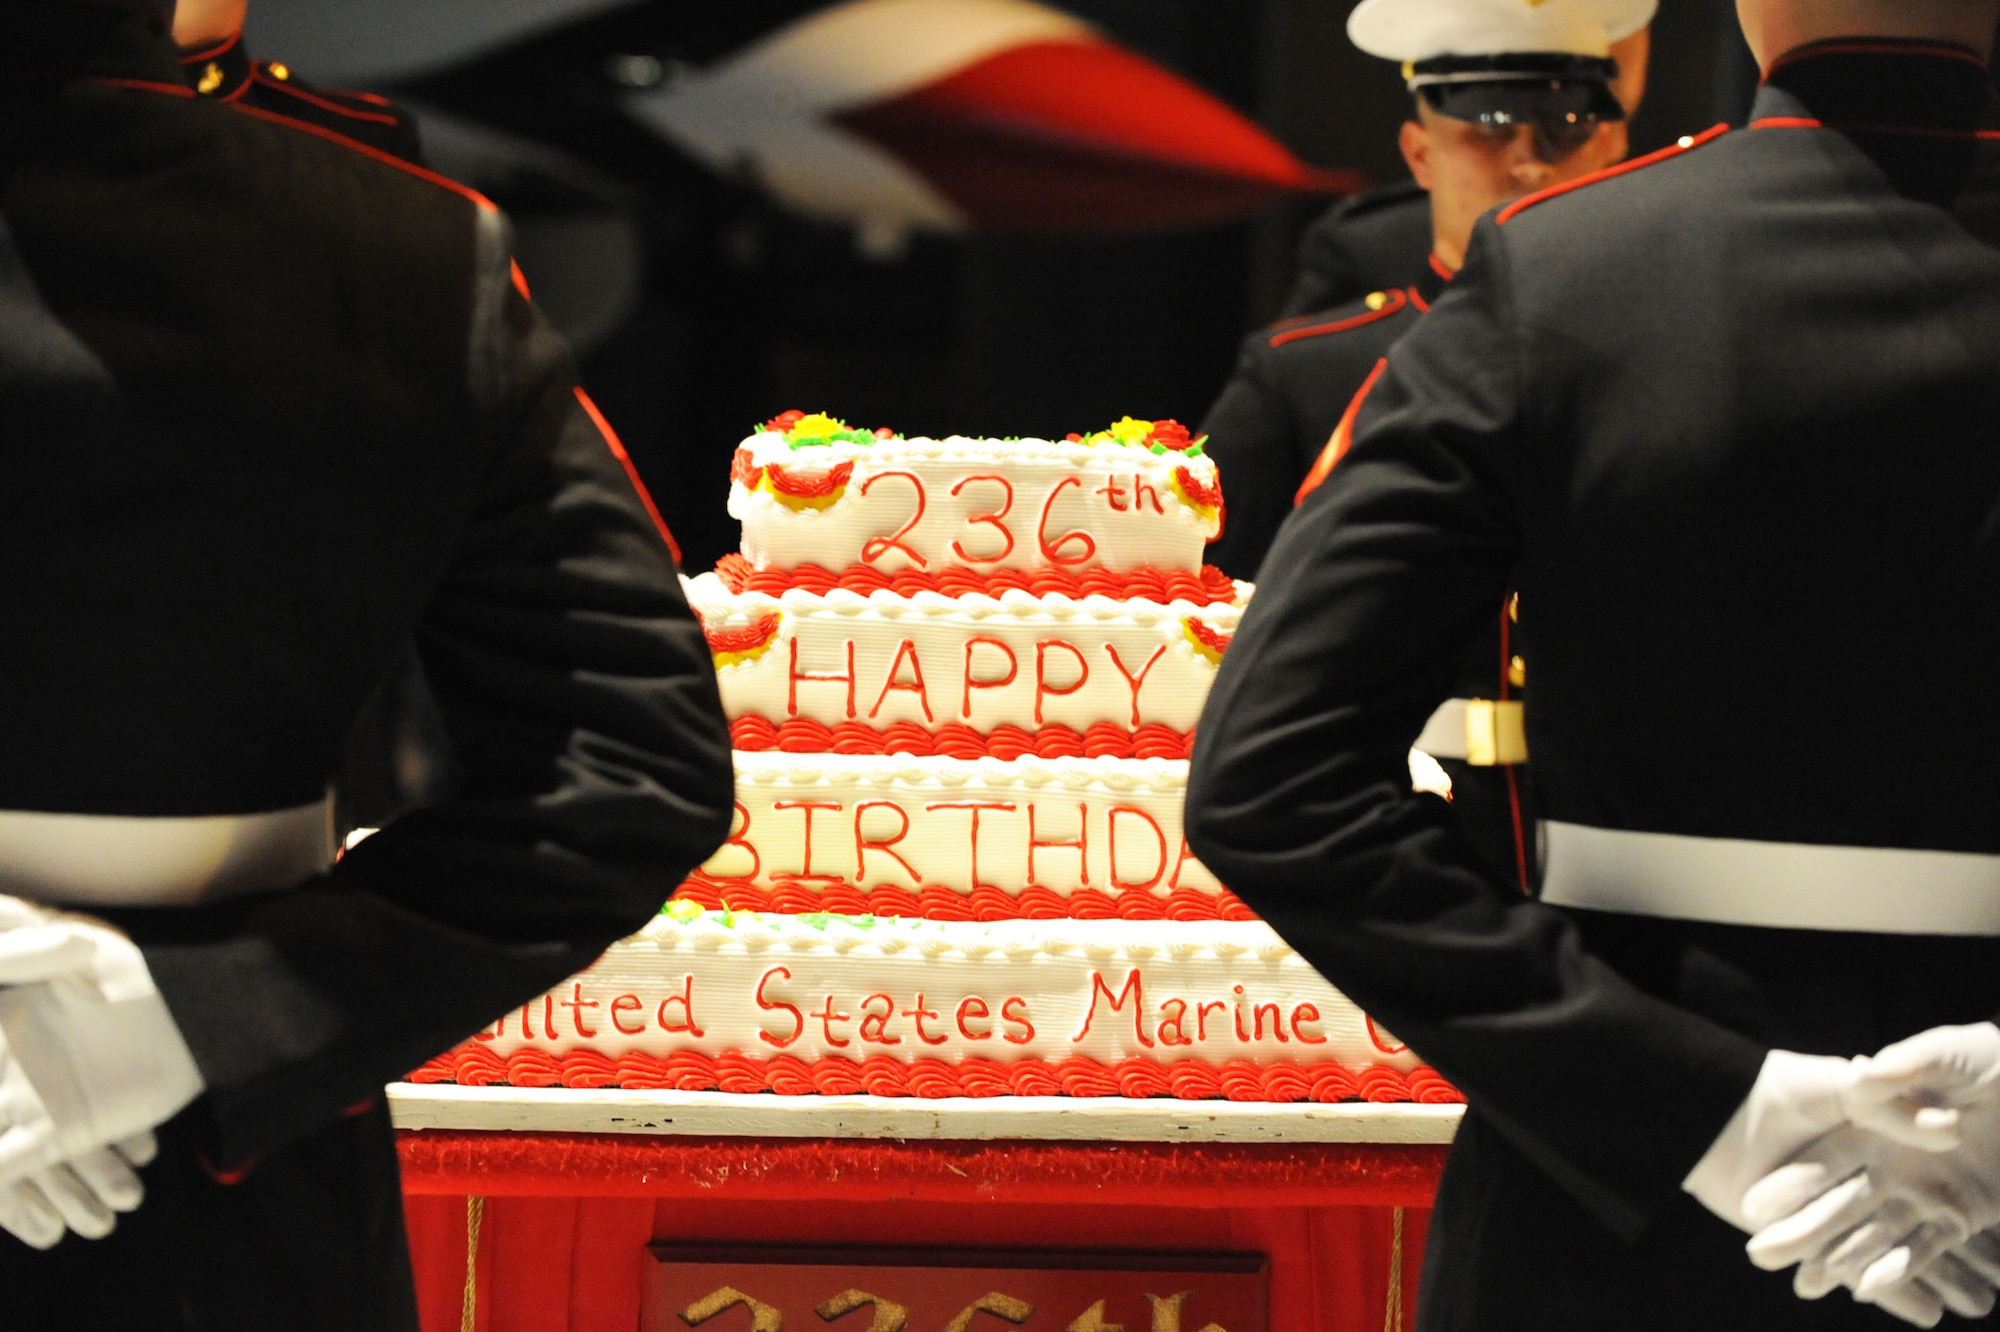 Members of Marine Aircraft Group 49, Detachment A held a traditional ball  at the Museum of Aviation as part of celebrating the Marine Corps 236th birthday, to commemorate the rich heritage of those who served and continue to serve our country. U. S. Air Force photo by Raymond Crayton Jr.